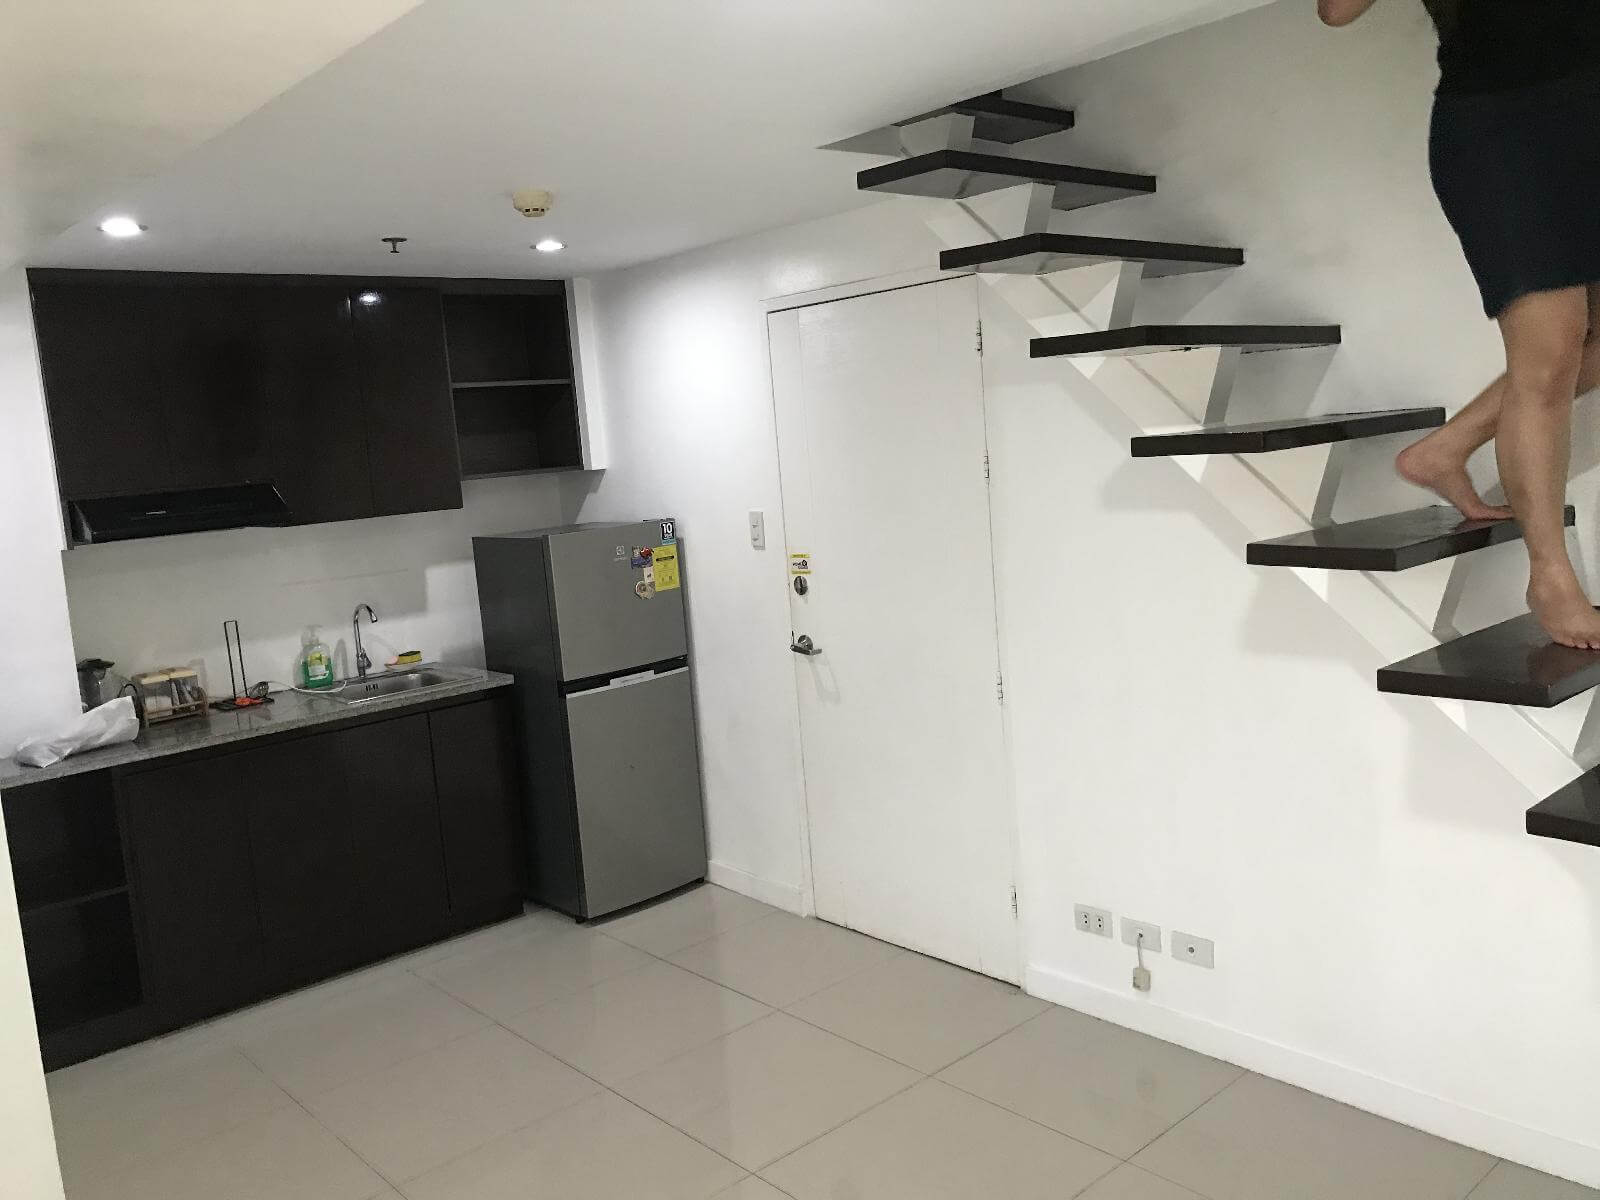 Stairs and Kitchen